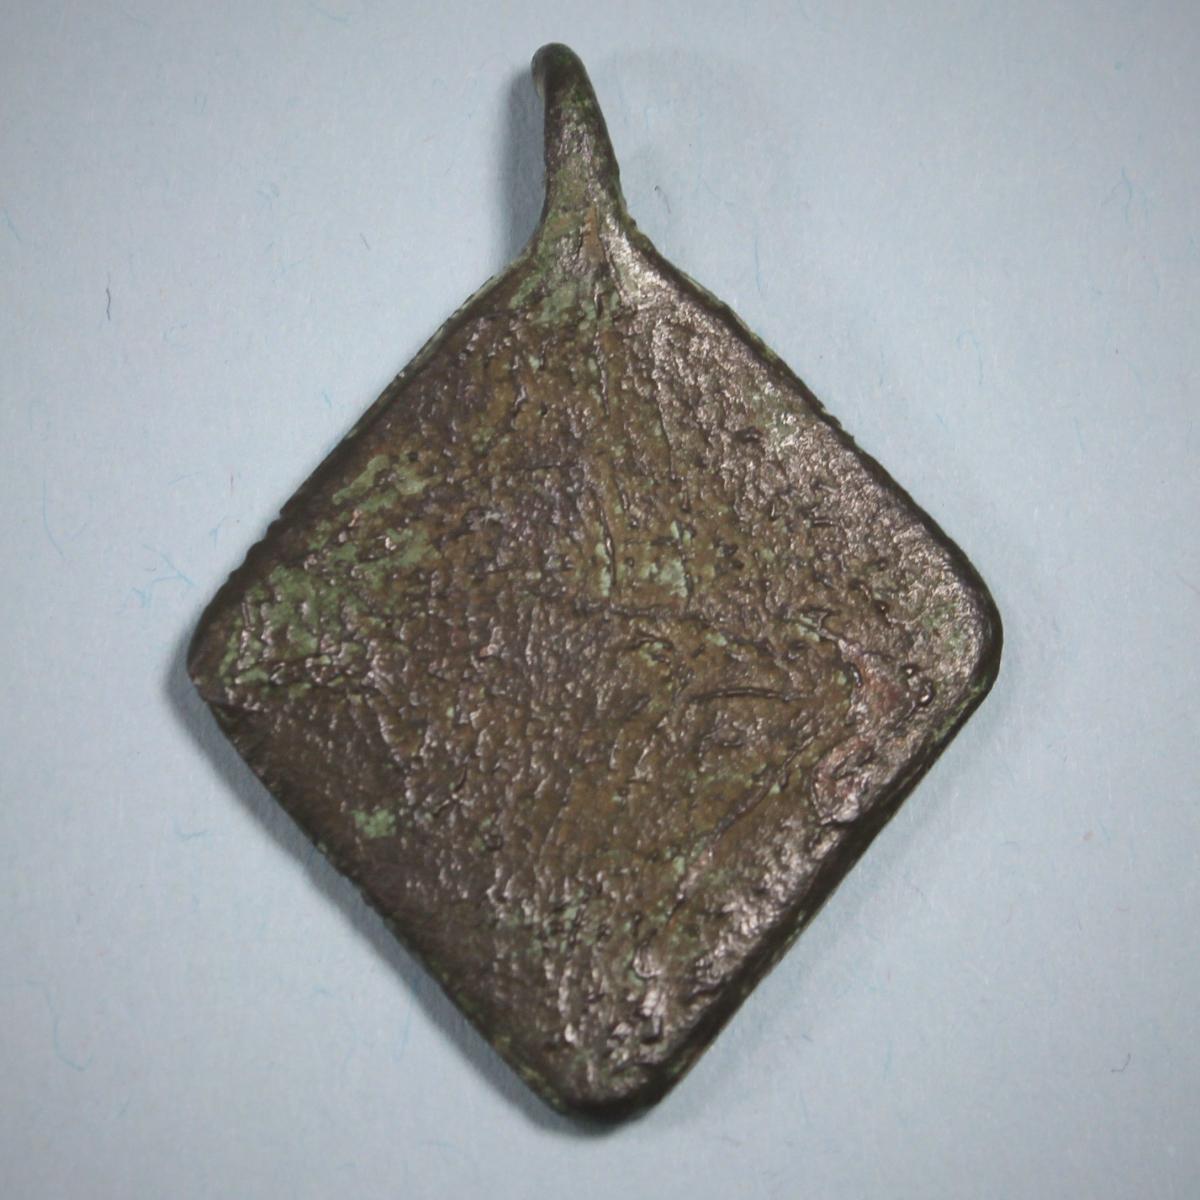 FITZROGER - MEDIEVAL English Horse Harness Pendant. 12th/13th Century.